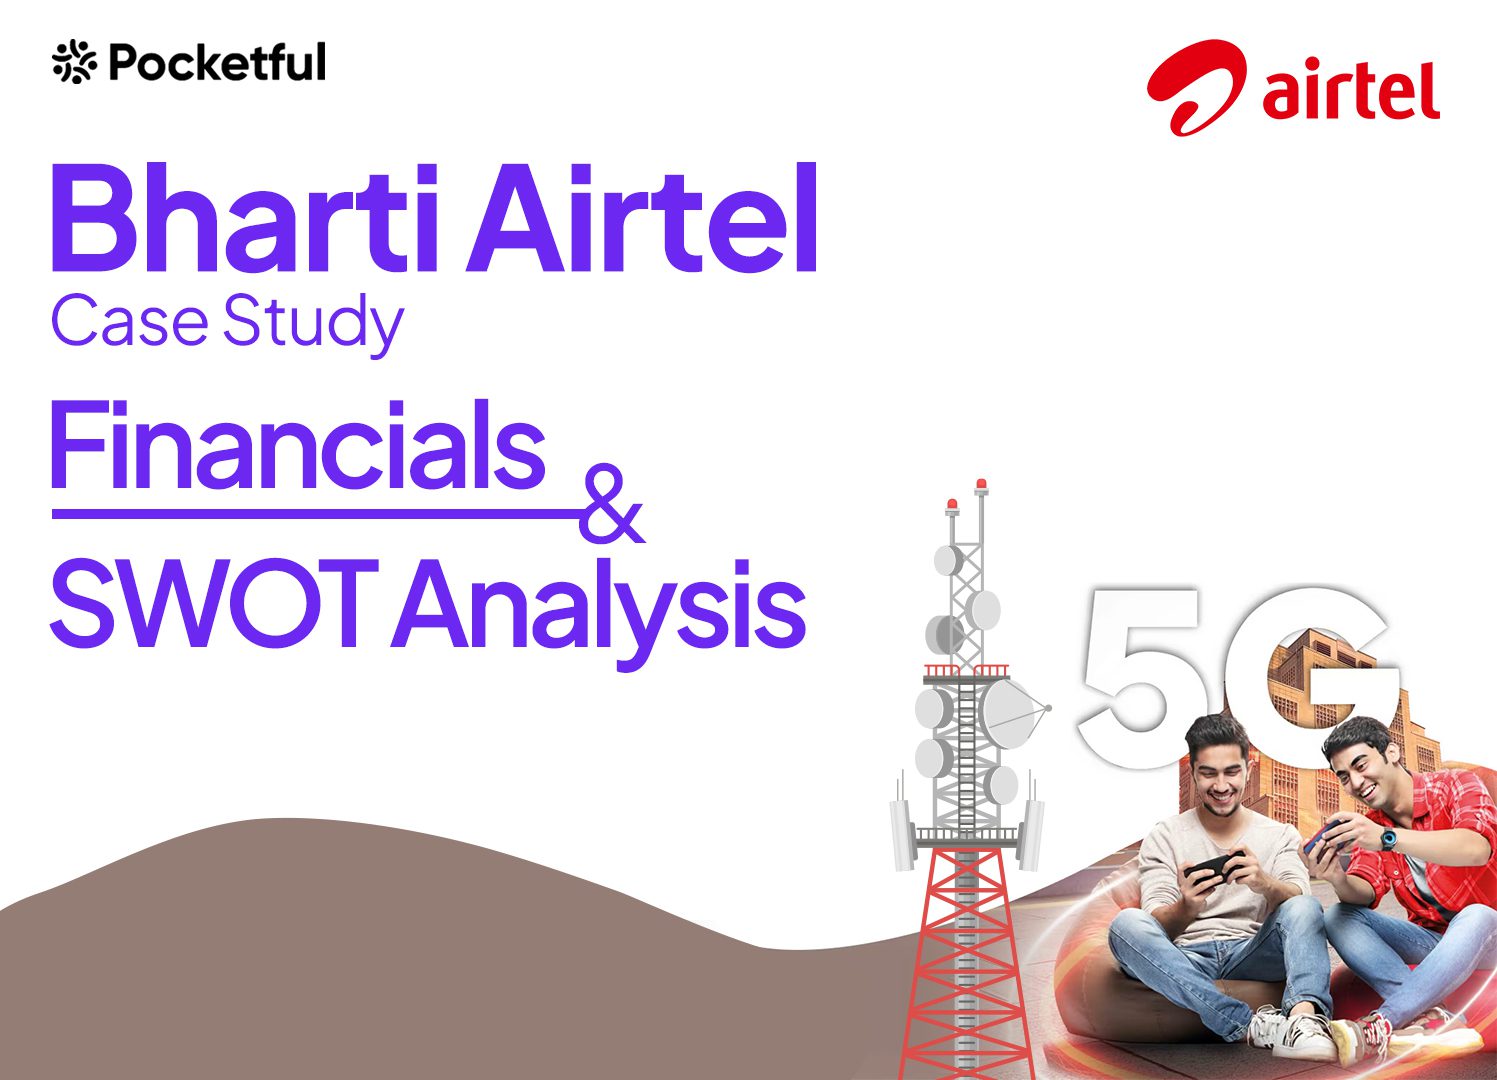 Bharti Airtel Case Study: Services, Financials, Shareholding Pattern, and SWOT Analysis